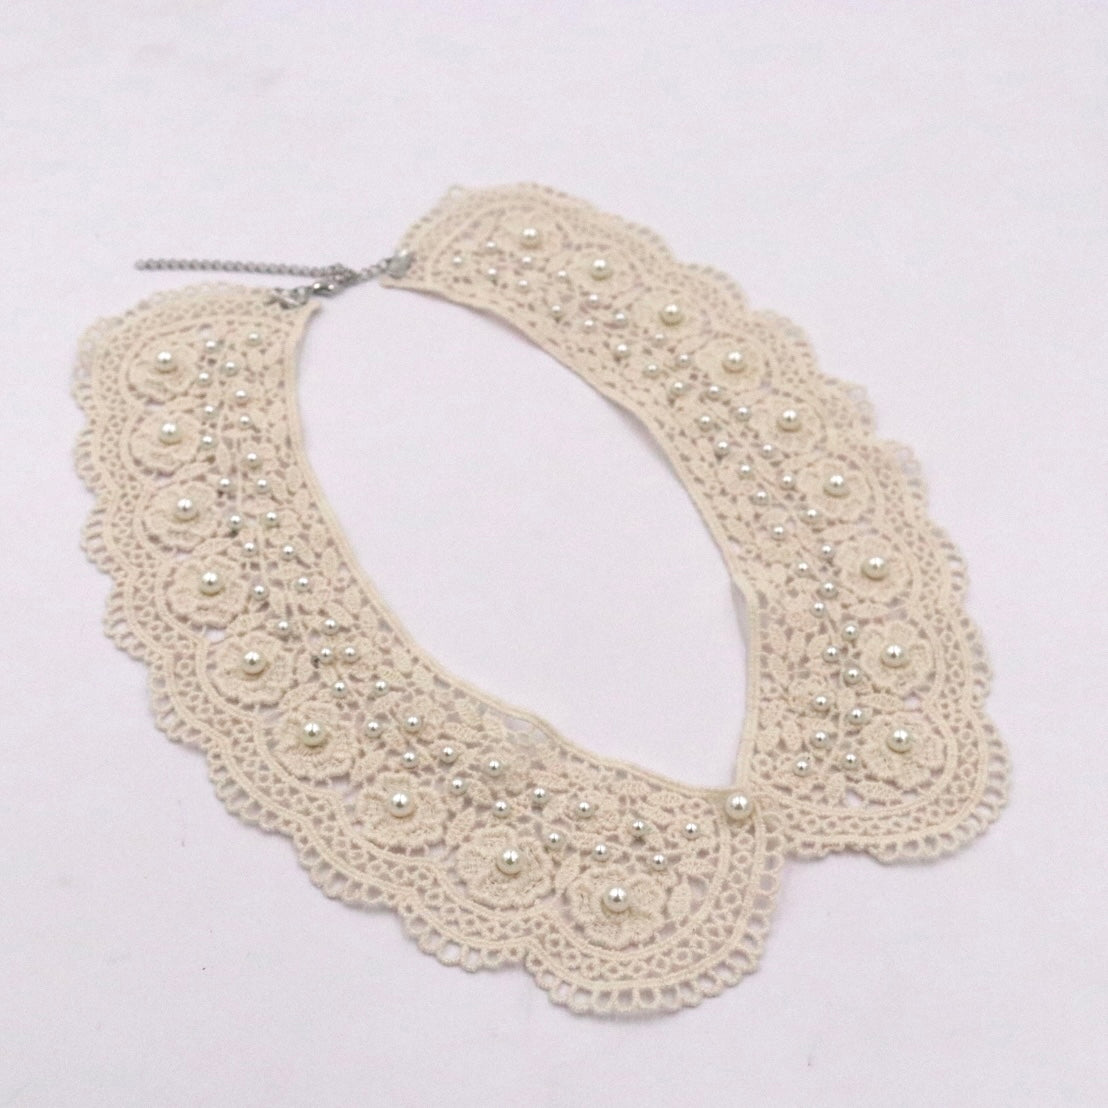 Beaded Lace Collar Necklace